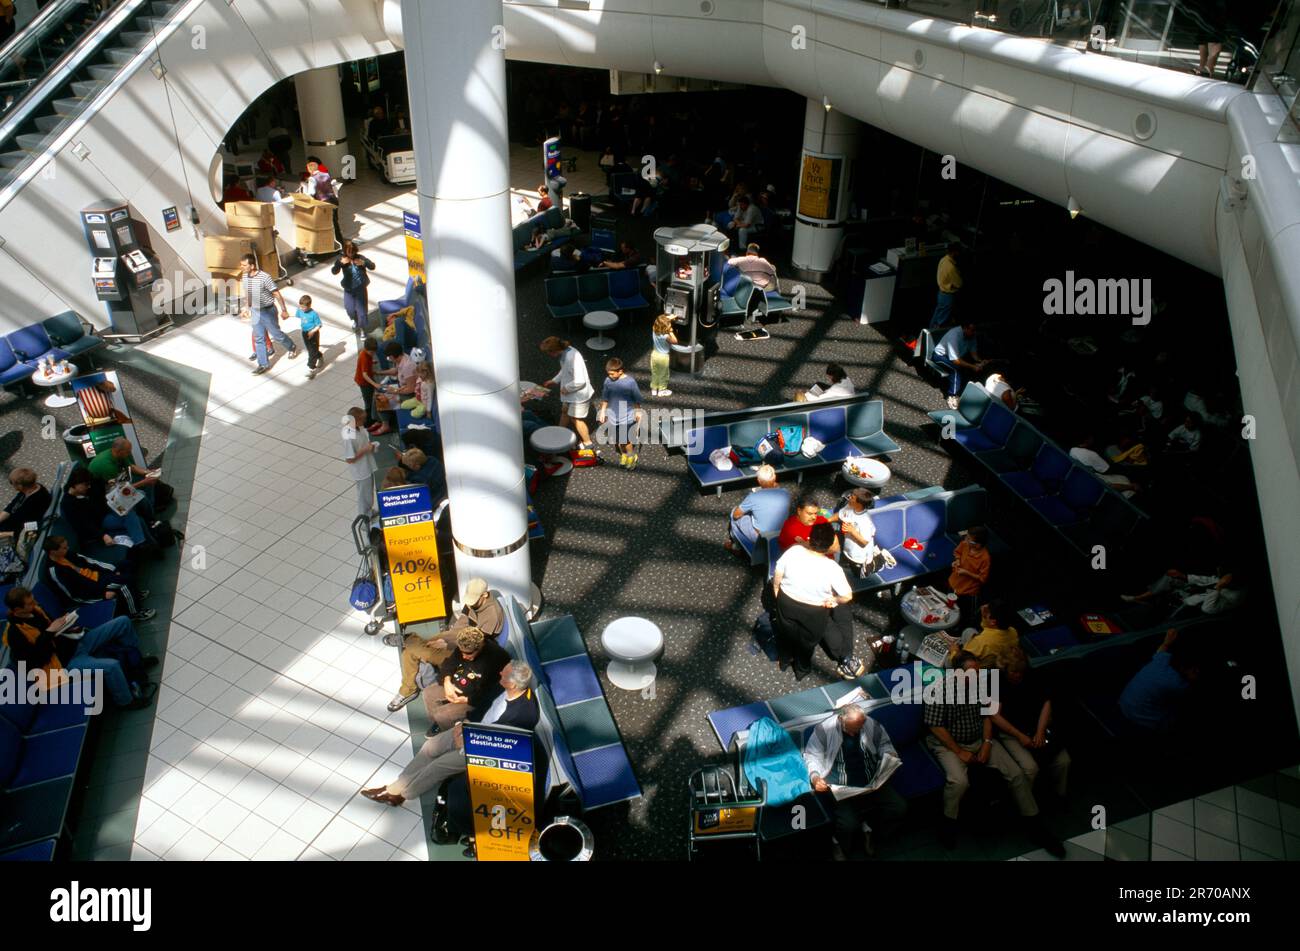 Gatwick Airport England Overview of Passengers waiting in Departure Lounge & Duty Free Shopping Stock Photo